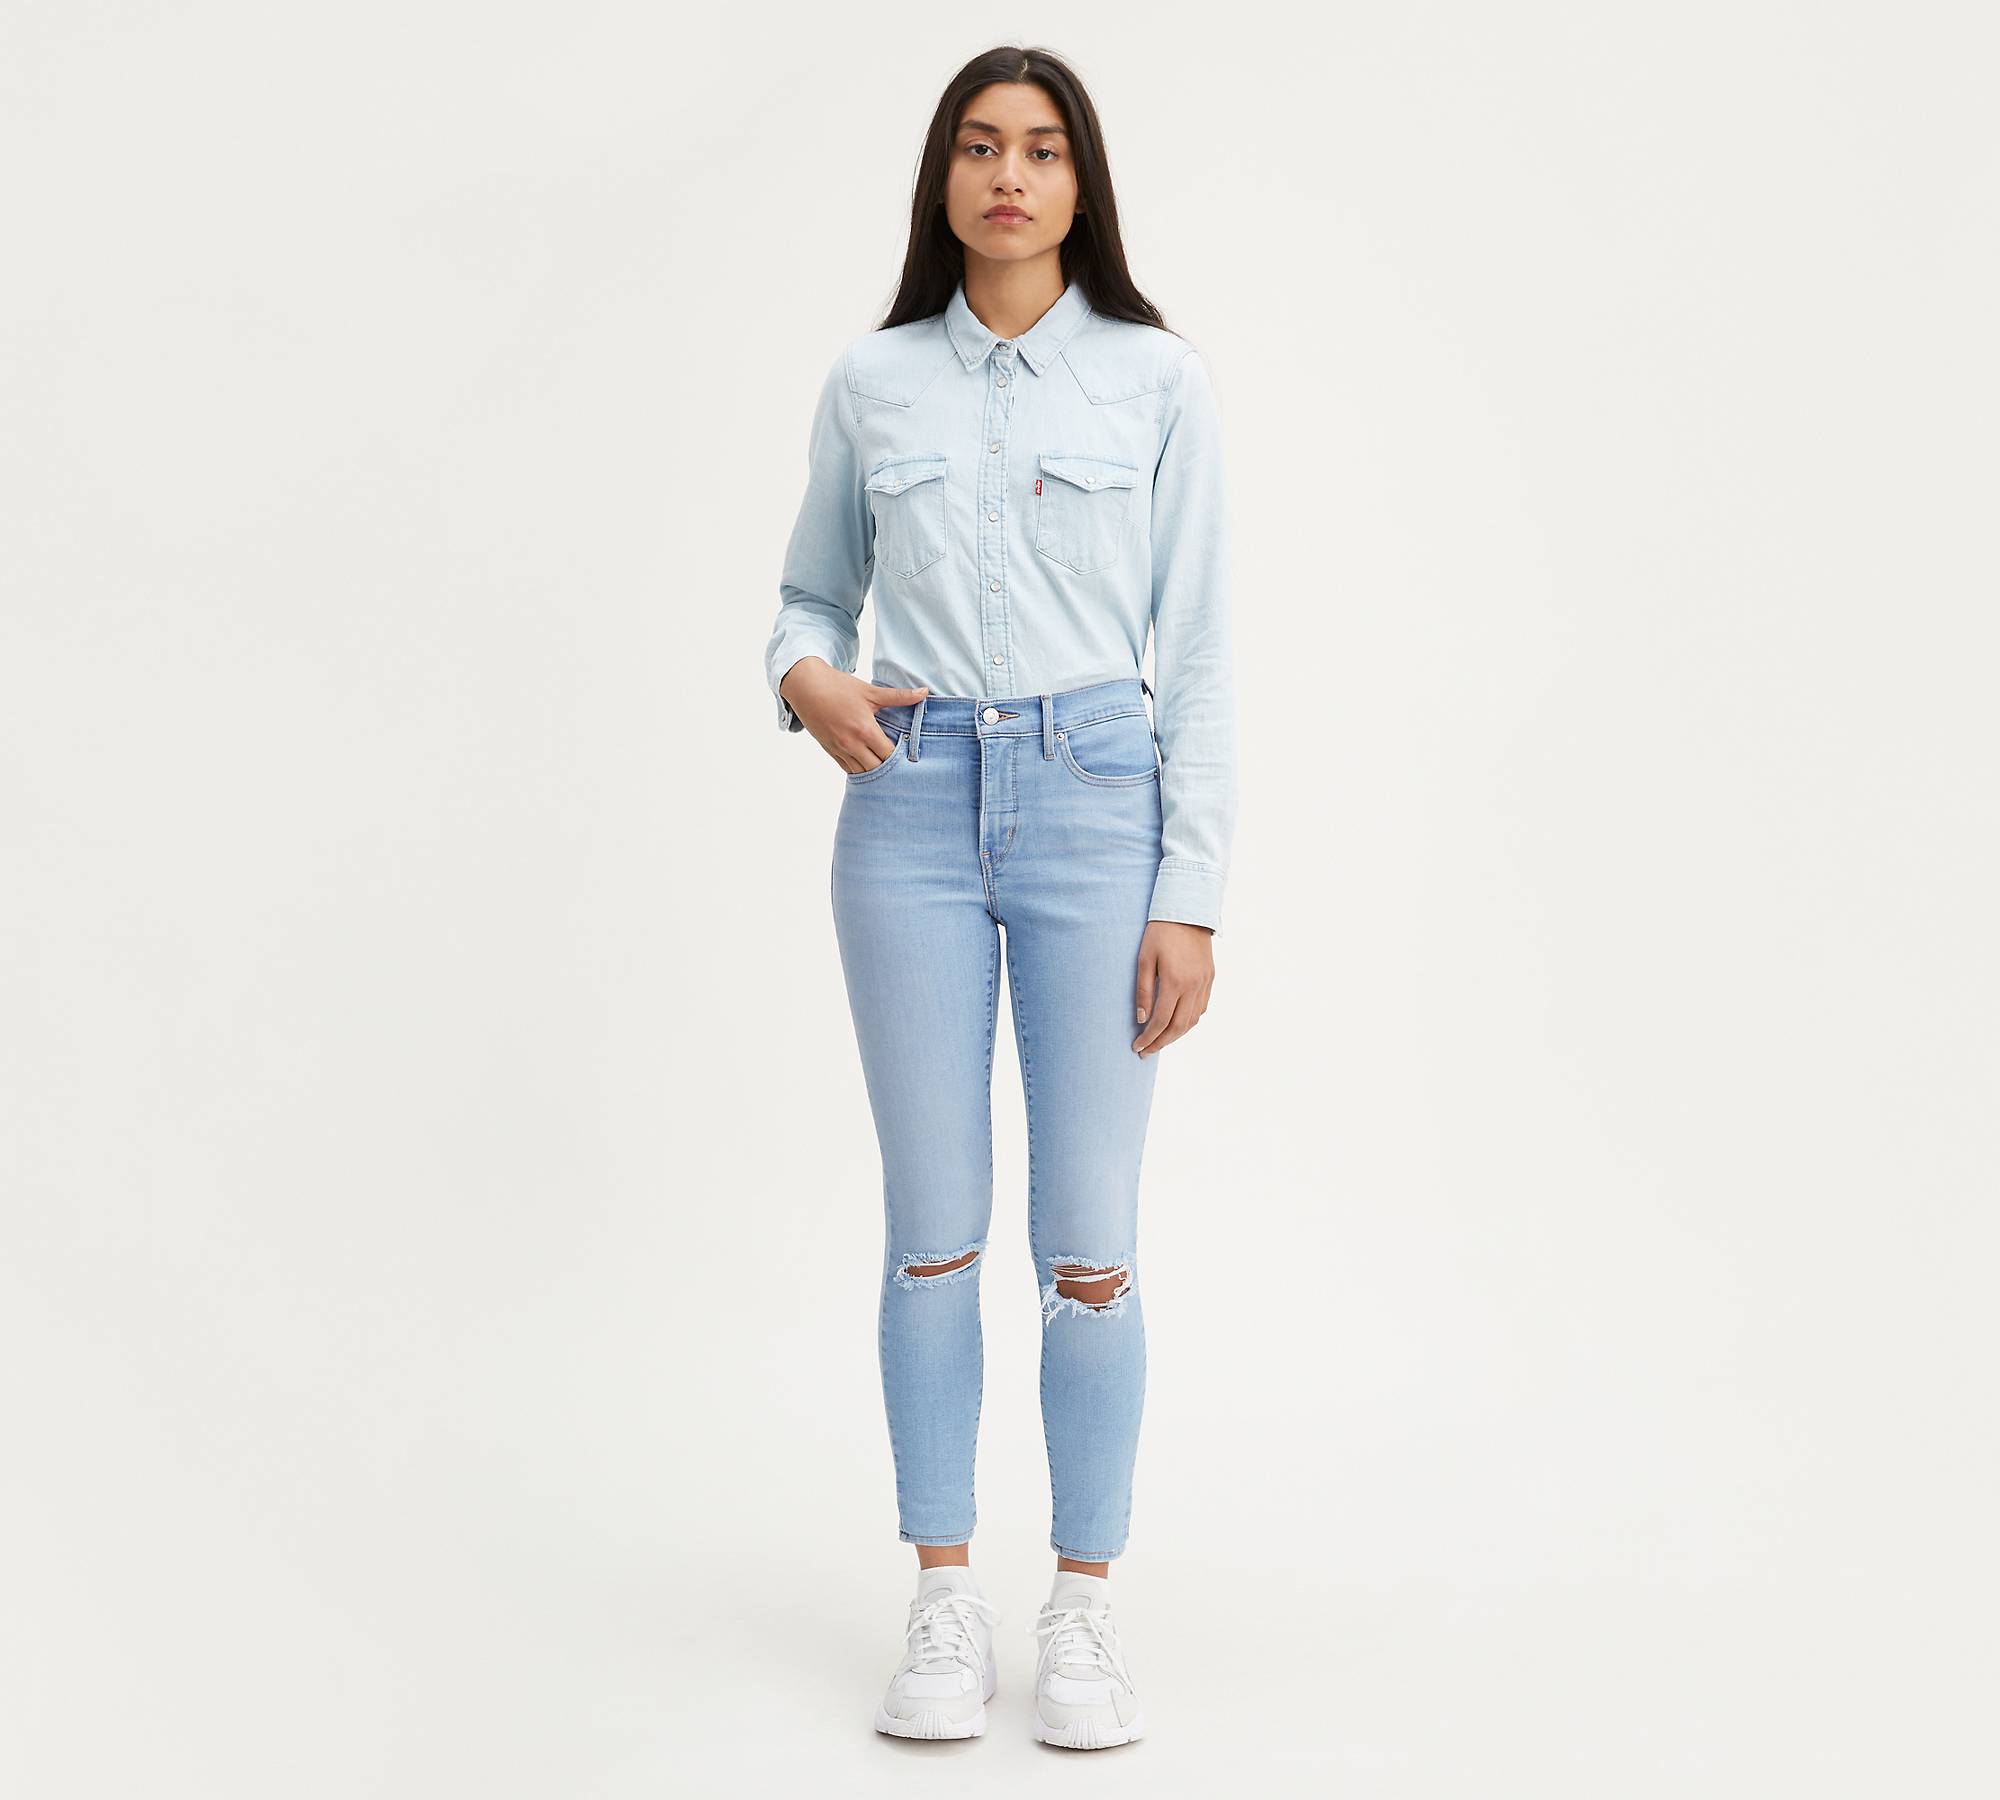 310 Shaping Super Skinny Ripped Women's Jeans - Light Wash | Levi's® US